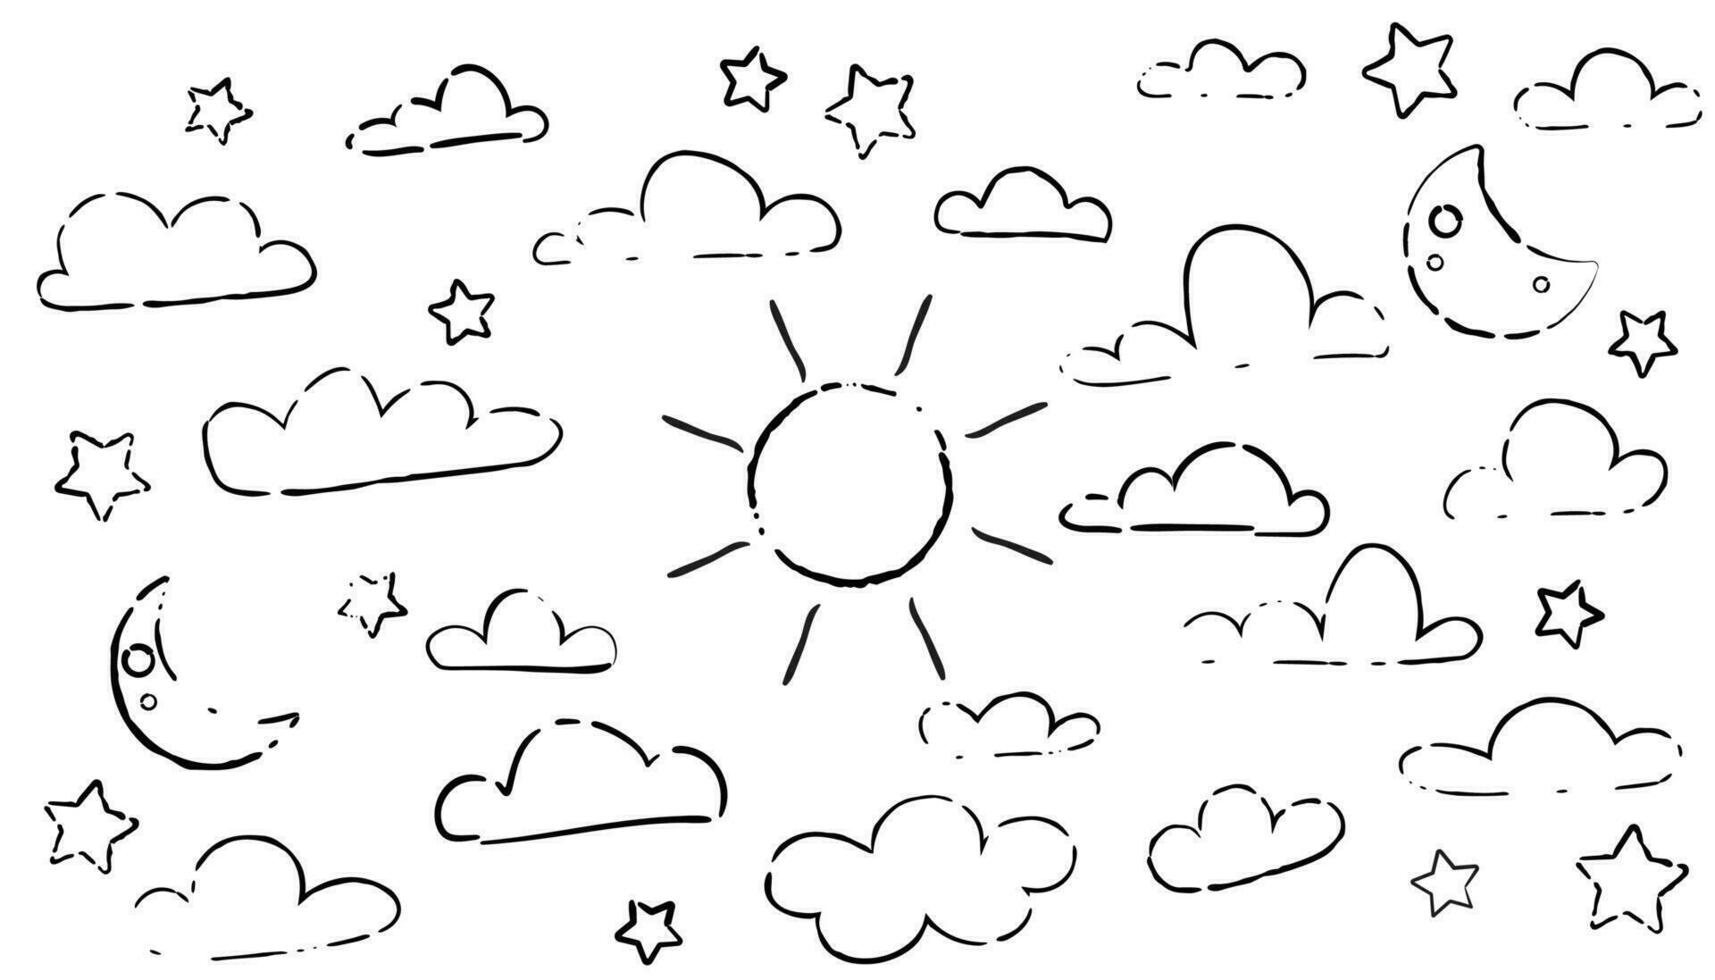 A cute and simple grunge hand drawn vector illustration set of weather icons. The doodle style sun, cloud, moon, and stars are perfect for graphic design projects and weather forecasts.